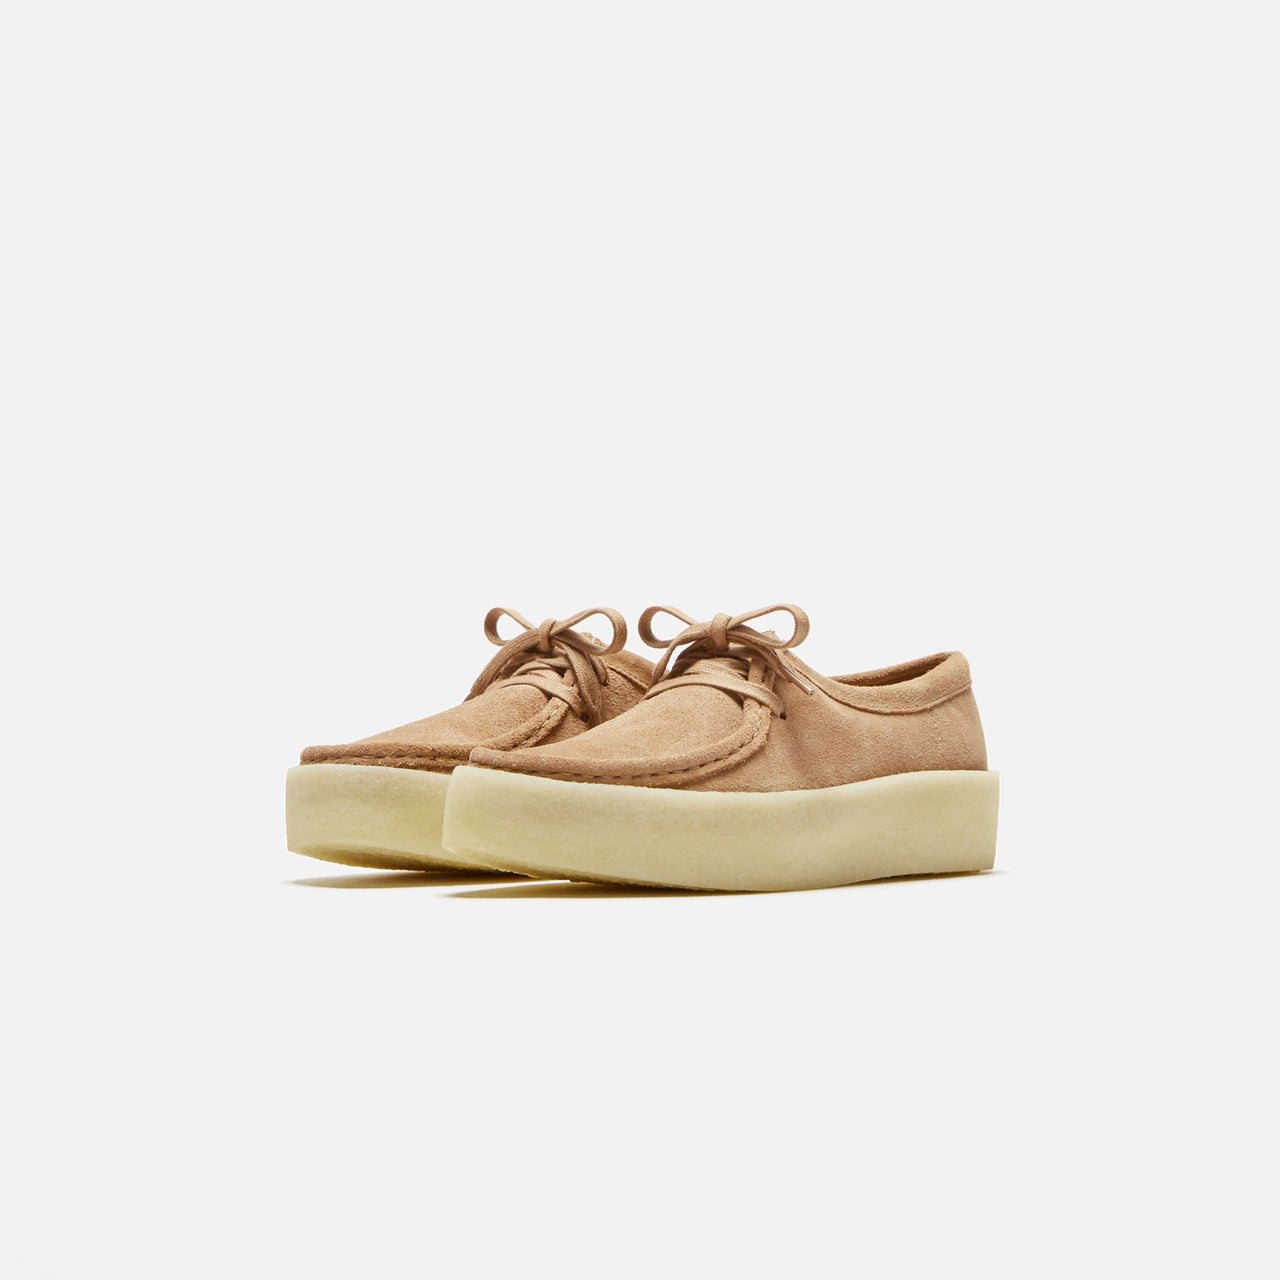 Stylish Clarks Originals Wallabee Cup Women's Warm Beige Suede 261732524 shoes on display